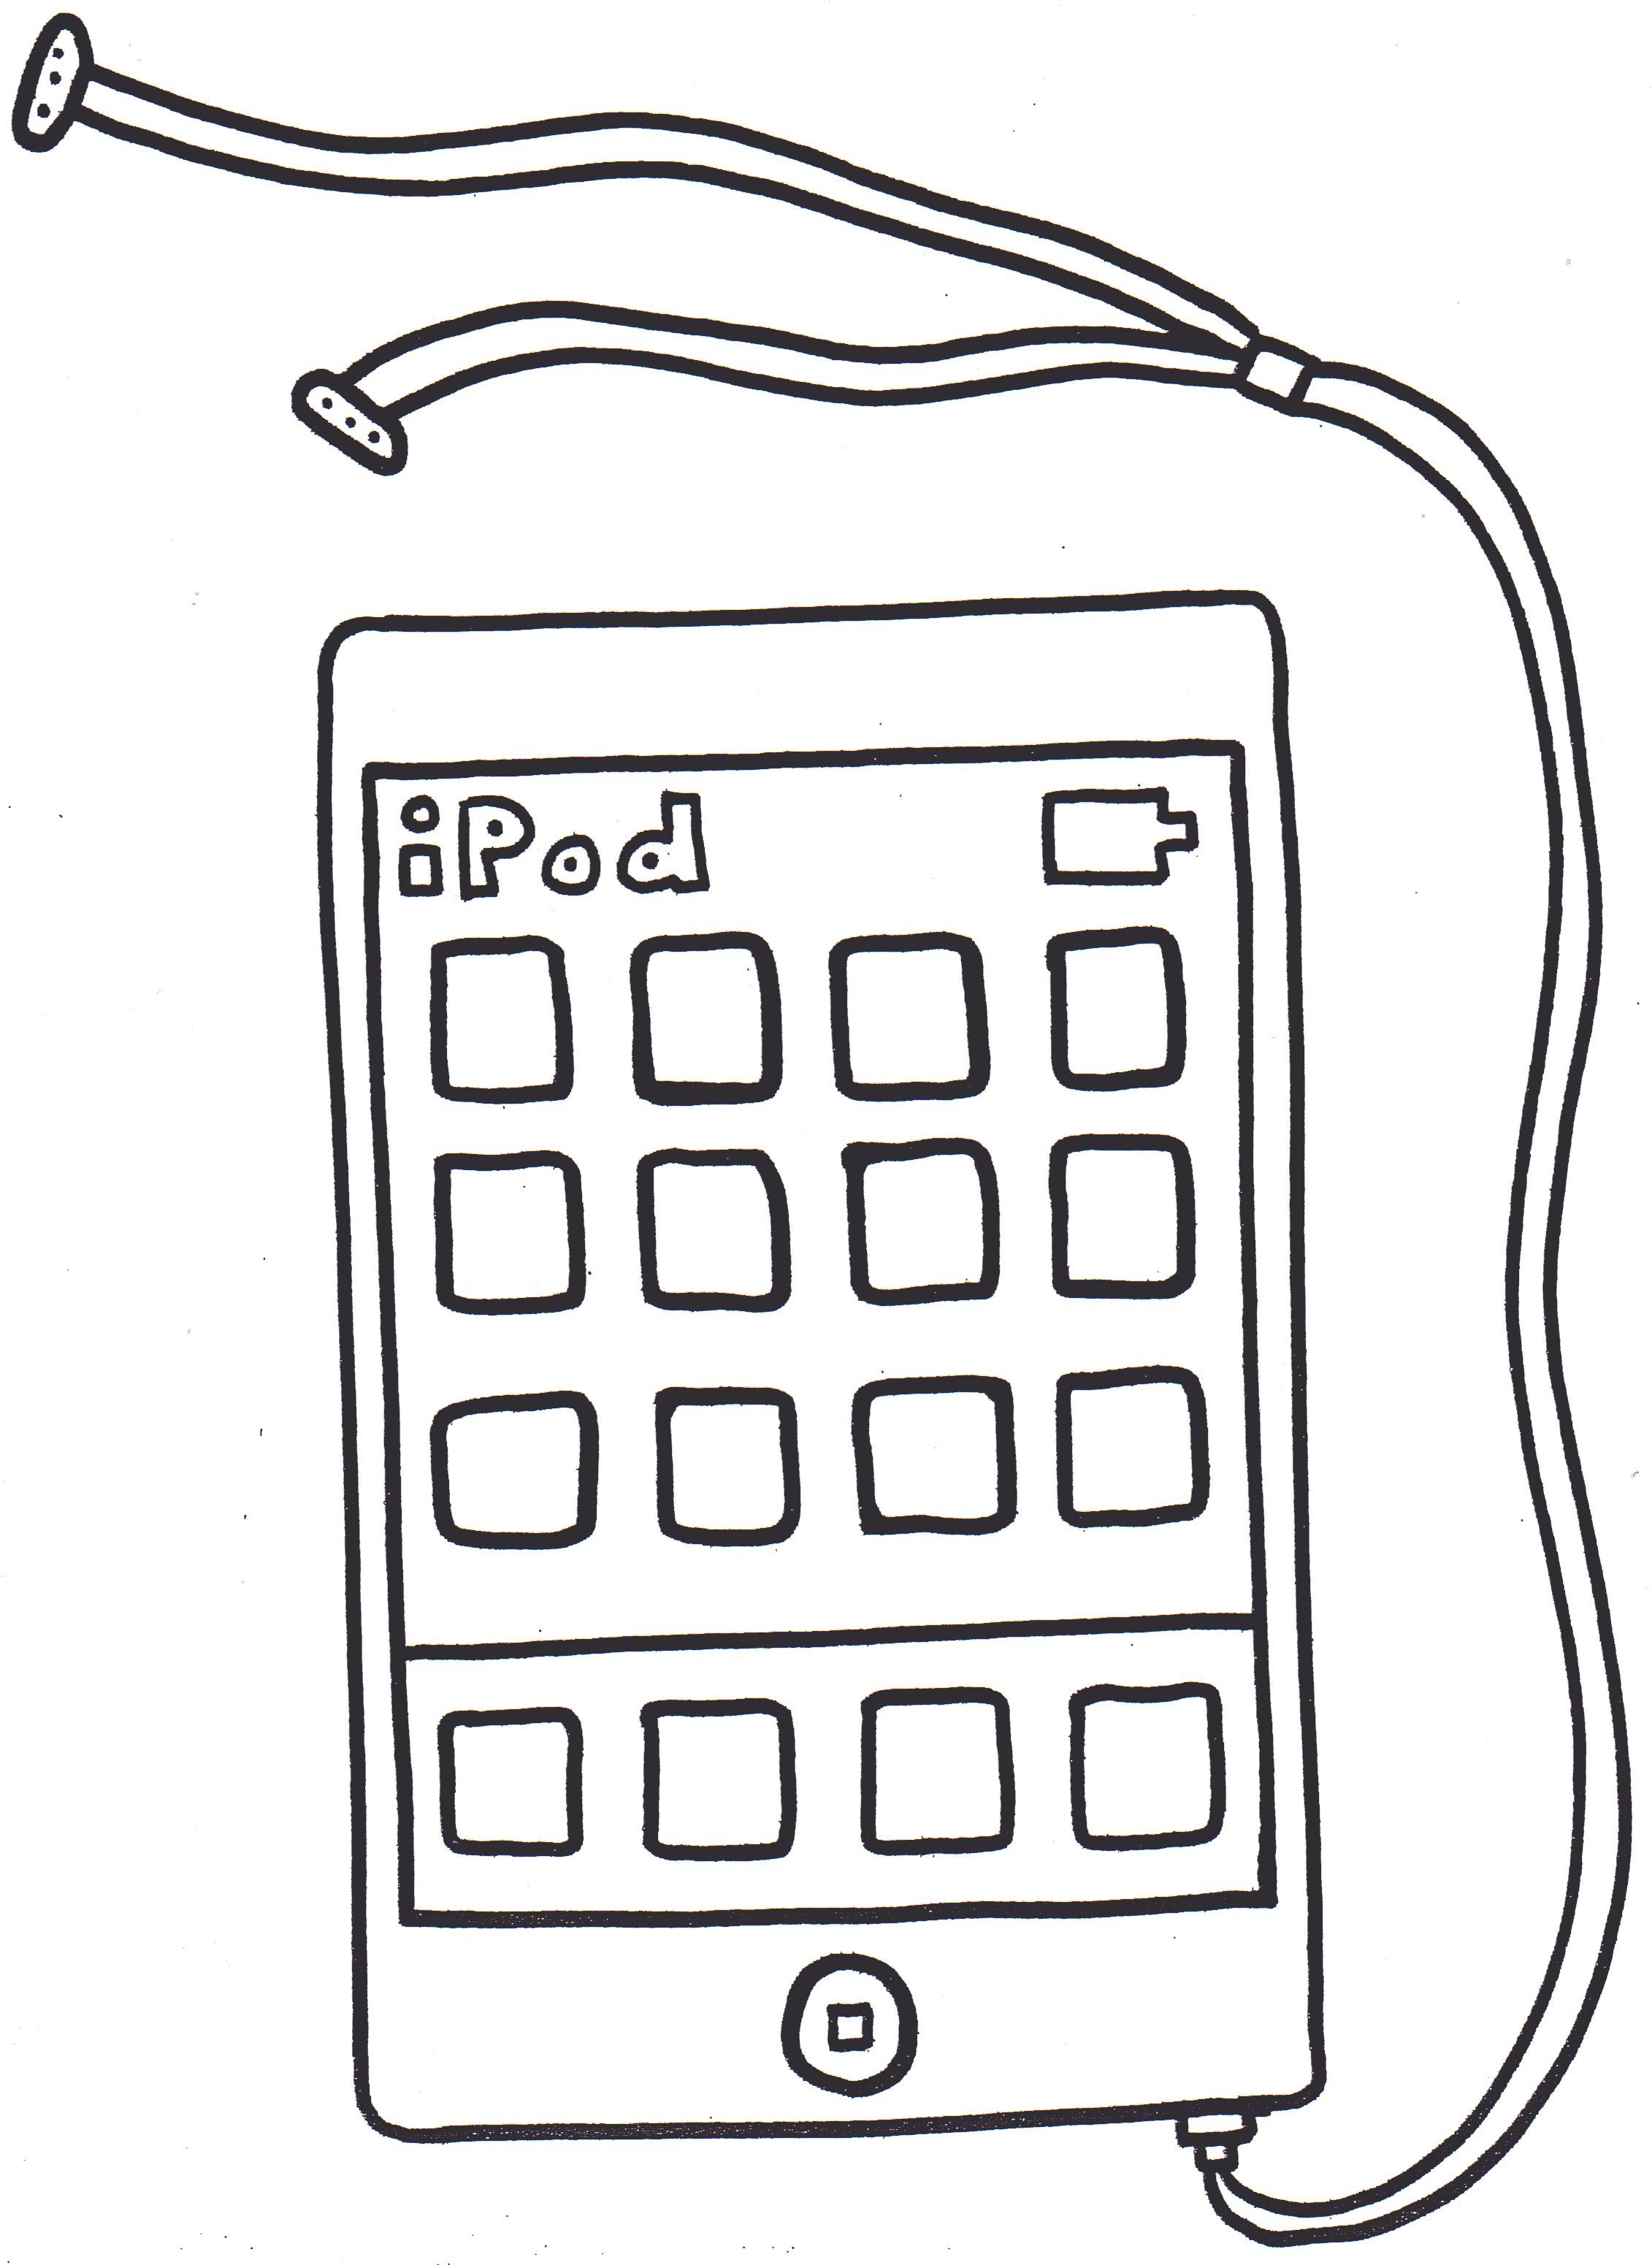 Free Ipad Coloring Pages, Download Free Ipad Coloring Pages png images ...